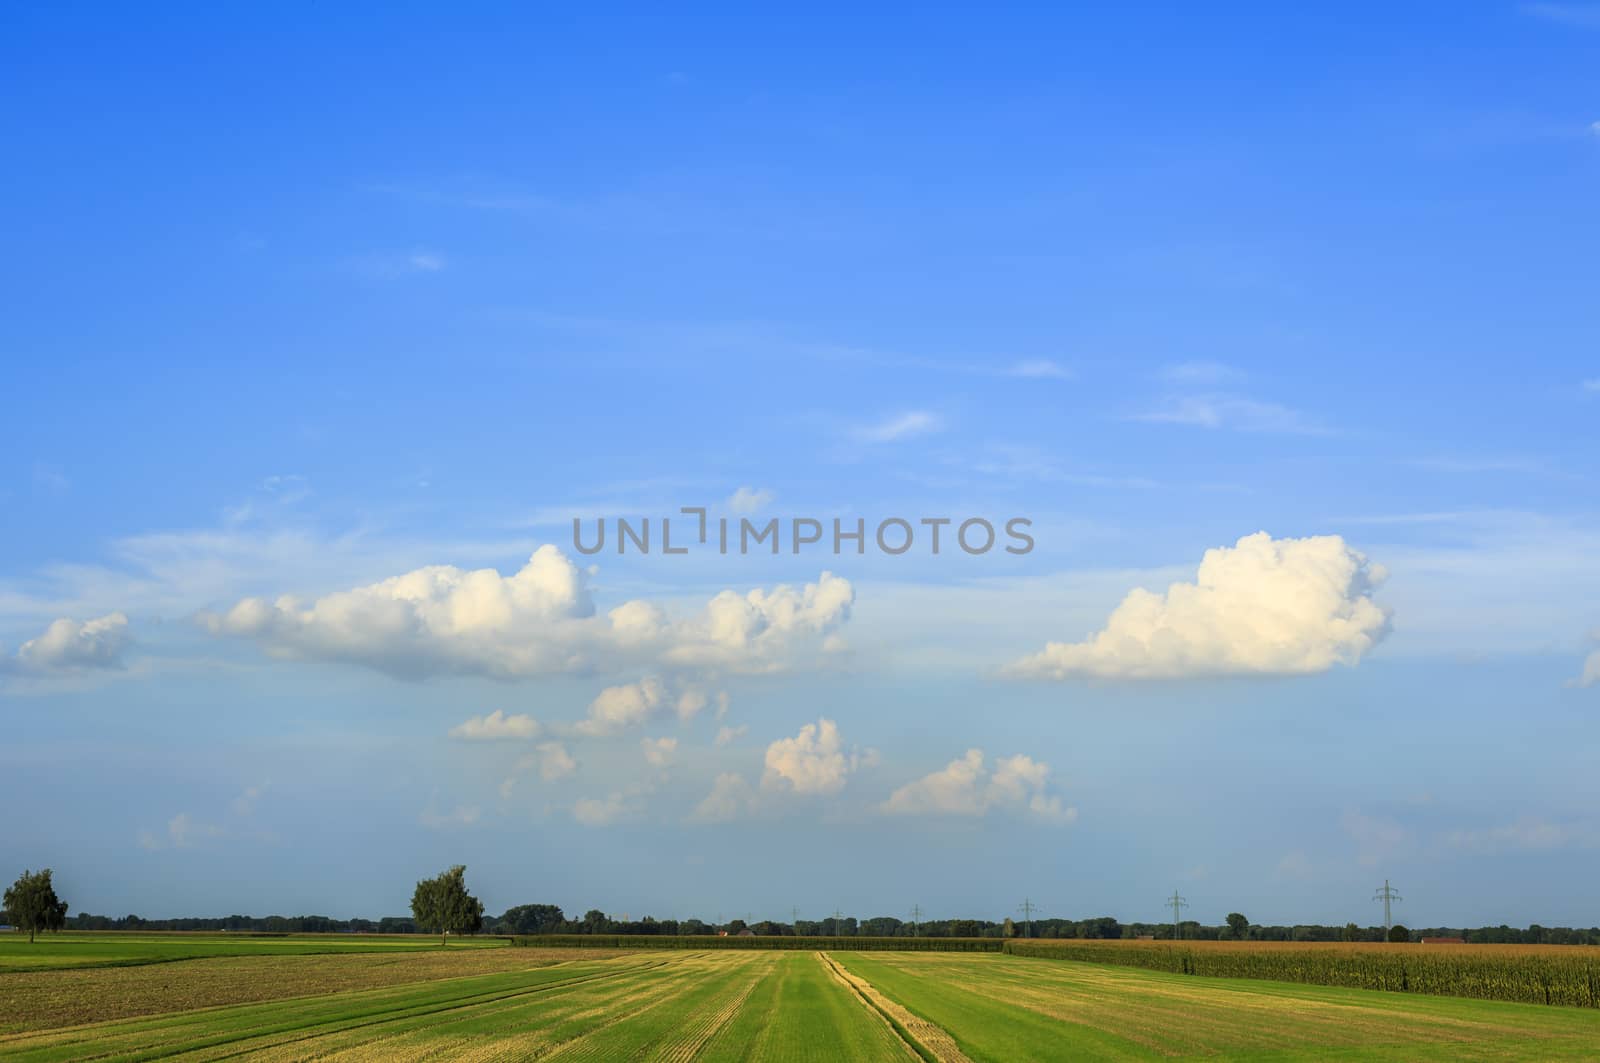 View over fields and meadows after harvesting, grassland and corn field, blue sky with some white clouds, trees and bushes on the horizon